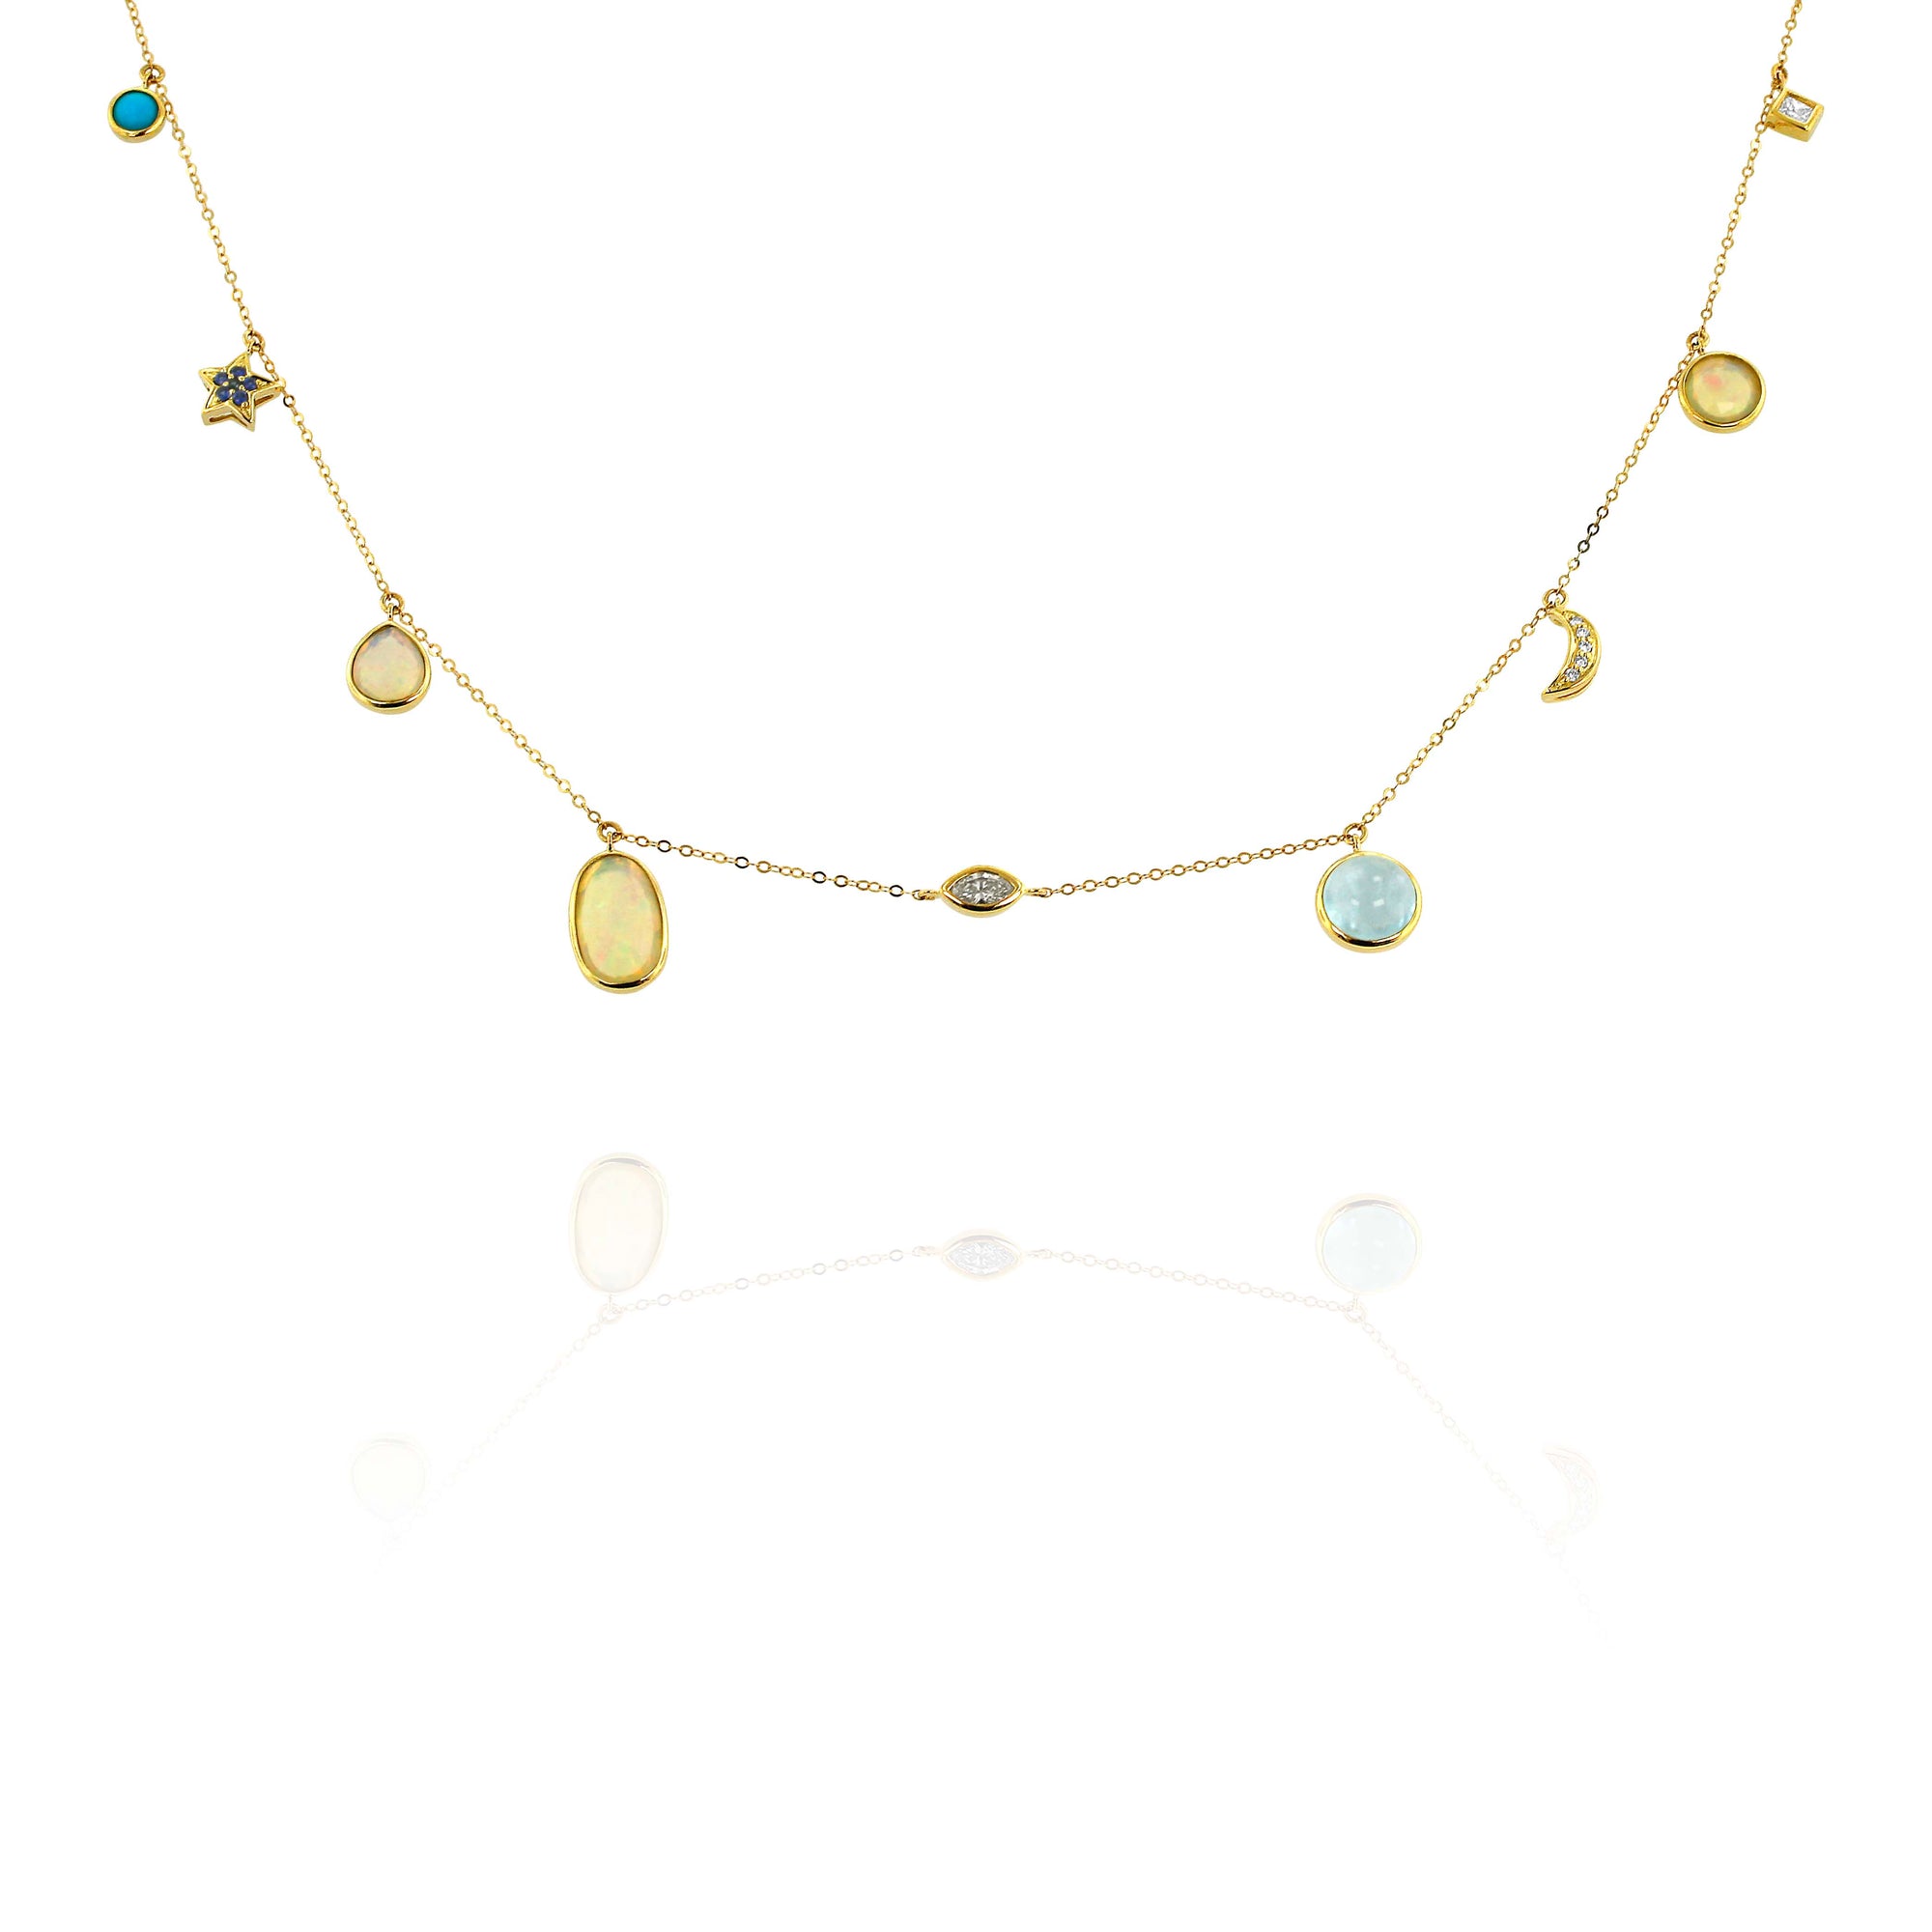 Opal, Aquamarine, and Turquoise Necklace by Yael - Talisman Collection Fine Jewelers